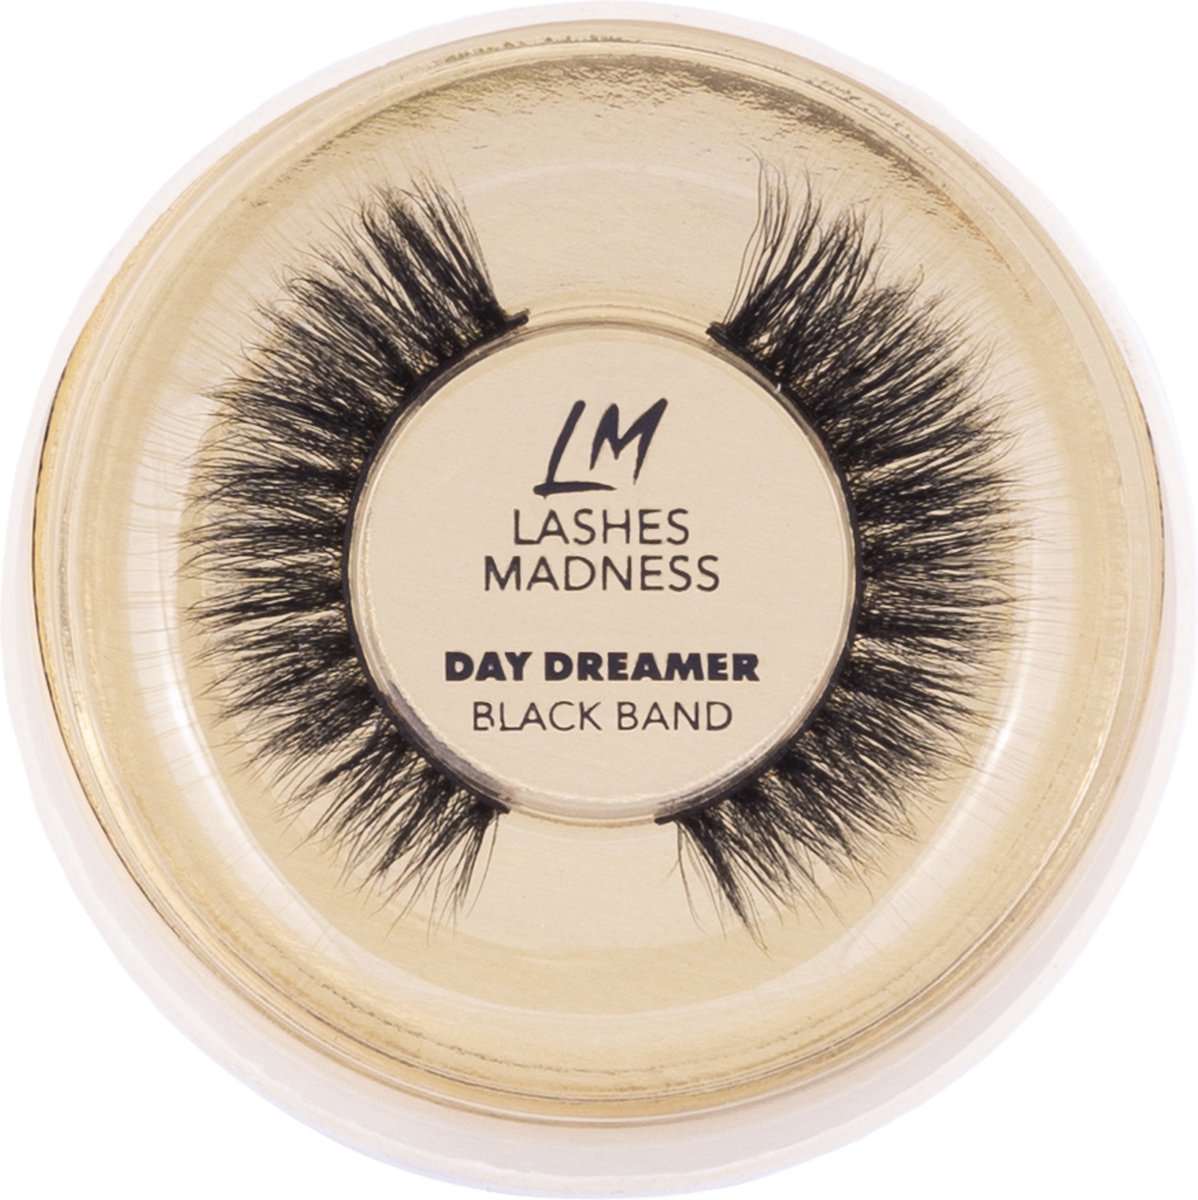 Lashes Madness - DAY DREAMER - Black Band - Vegan Mink Lashes - Wimpers - Valse Wimpers - Eyelashes - Luxe Wimpers